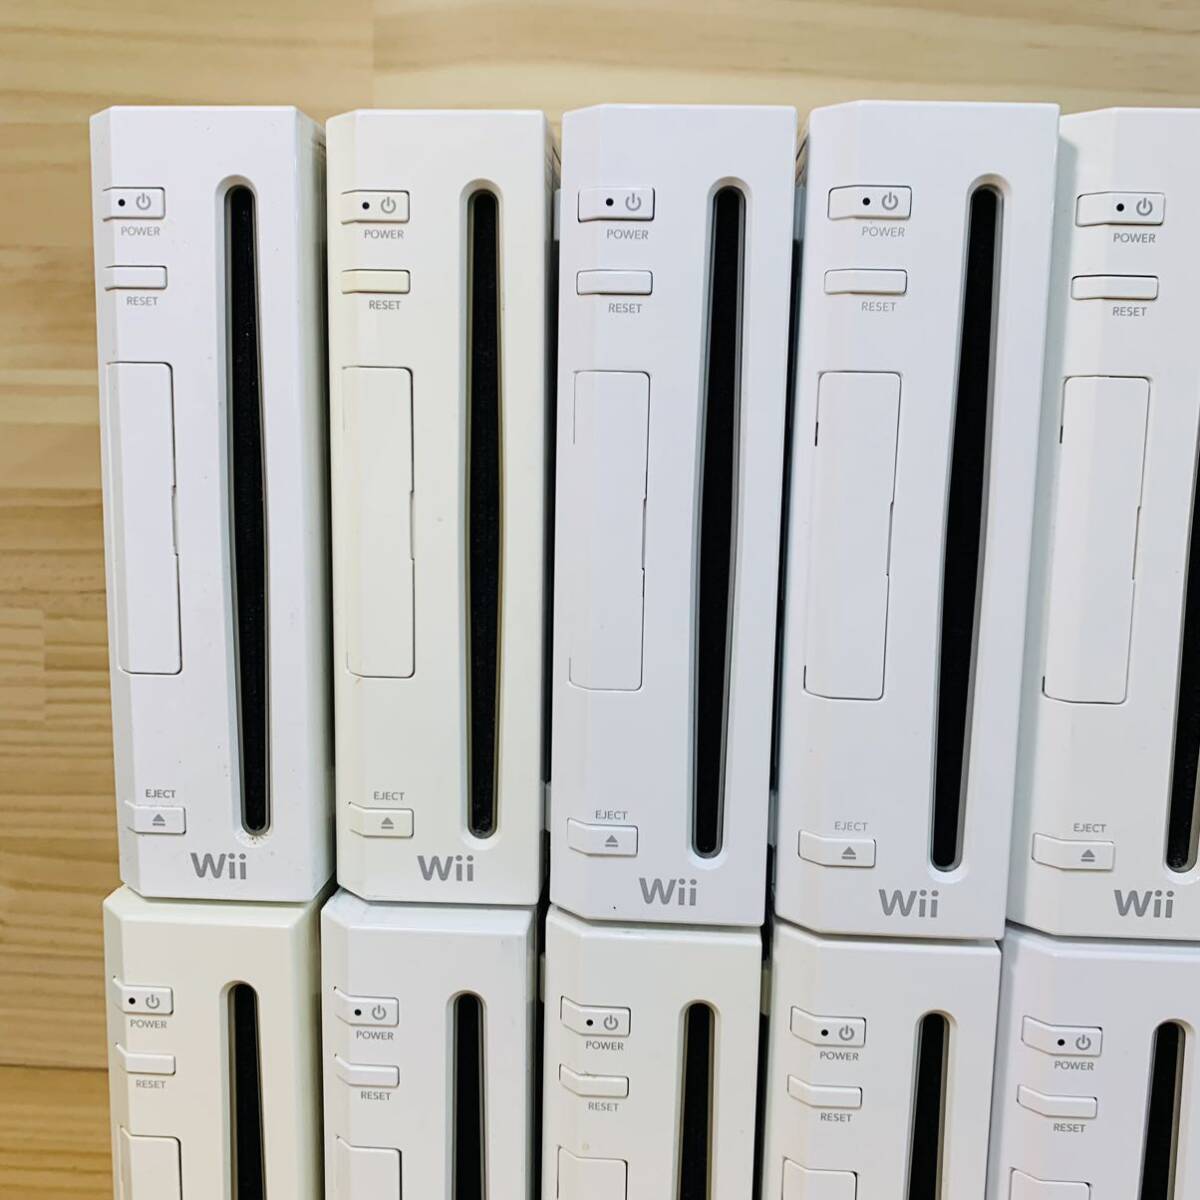 AAG28973 まとめ売り ジャンク品 Wii 本体 20台セット_画像2